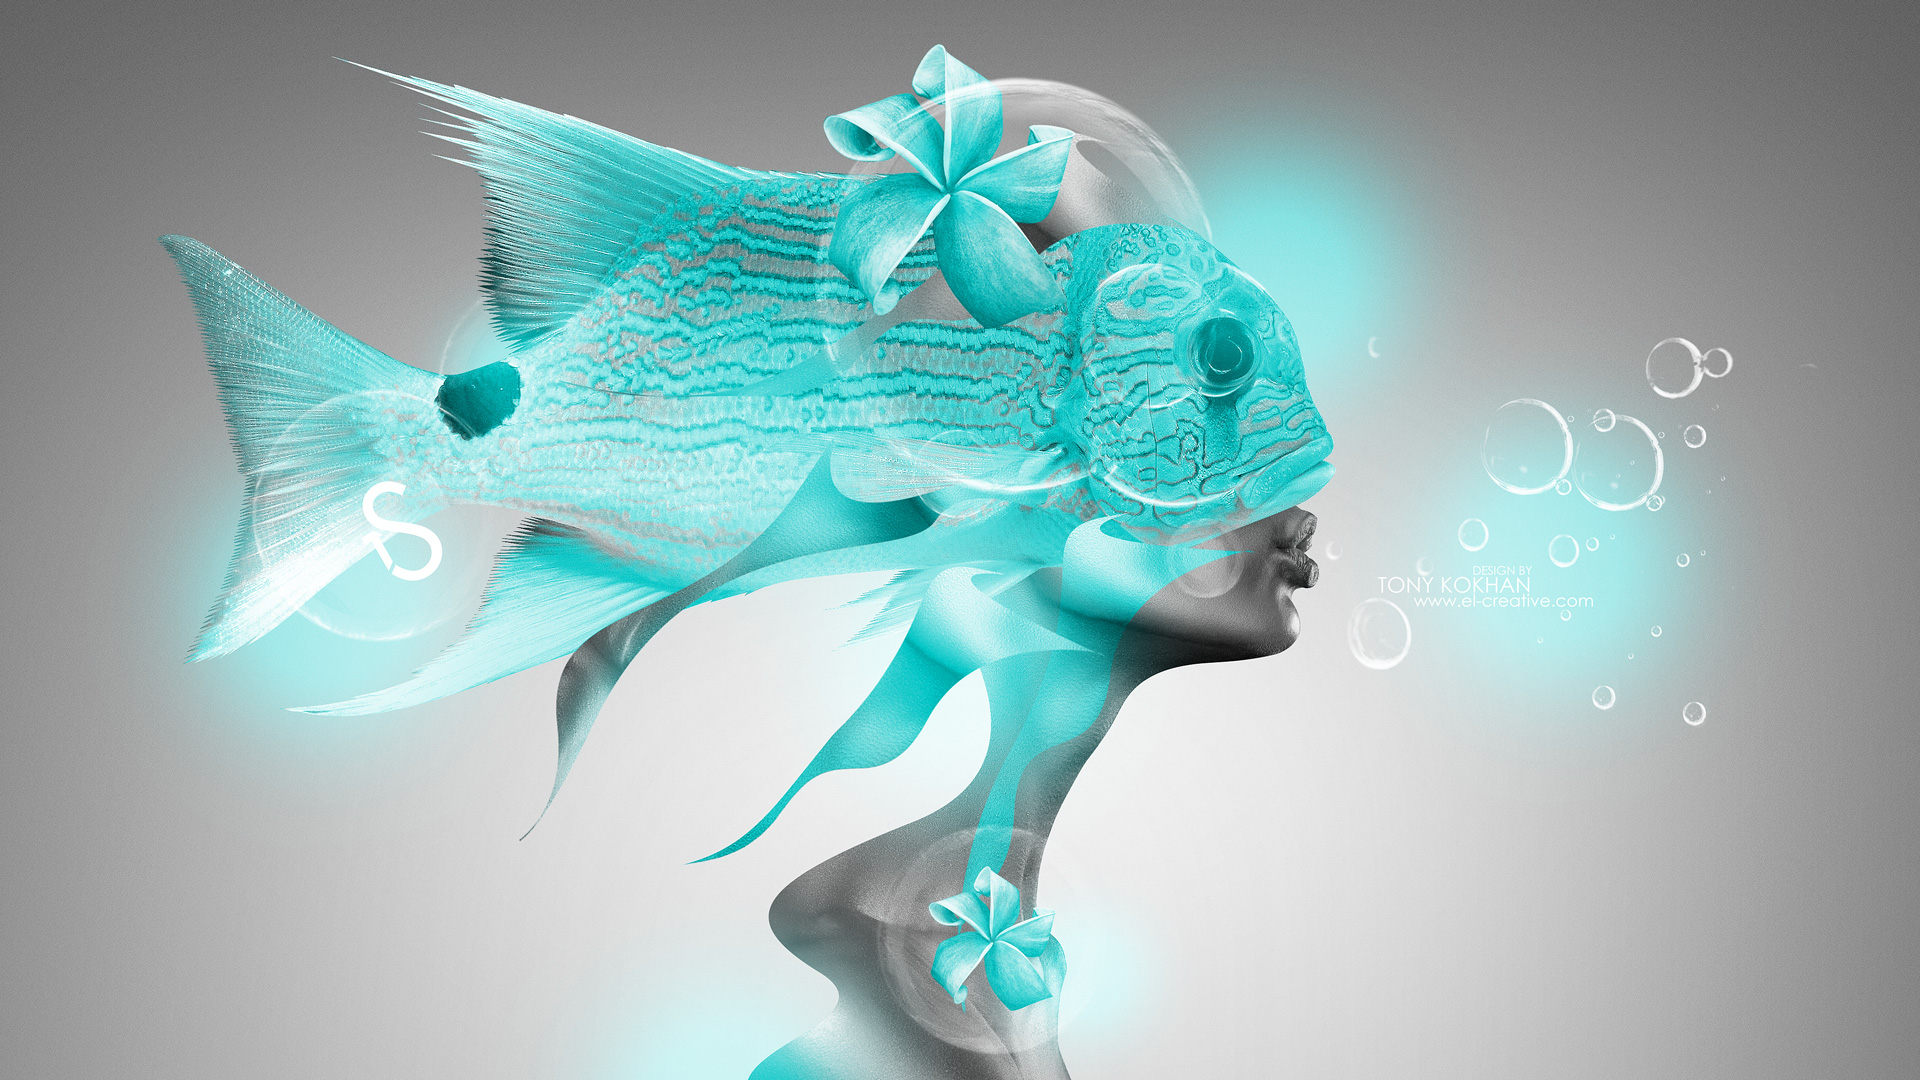 Girl Flowers Fantasy Turquoise Neon HD Wallpaper Design By Tony